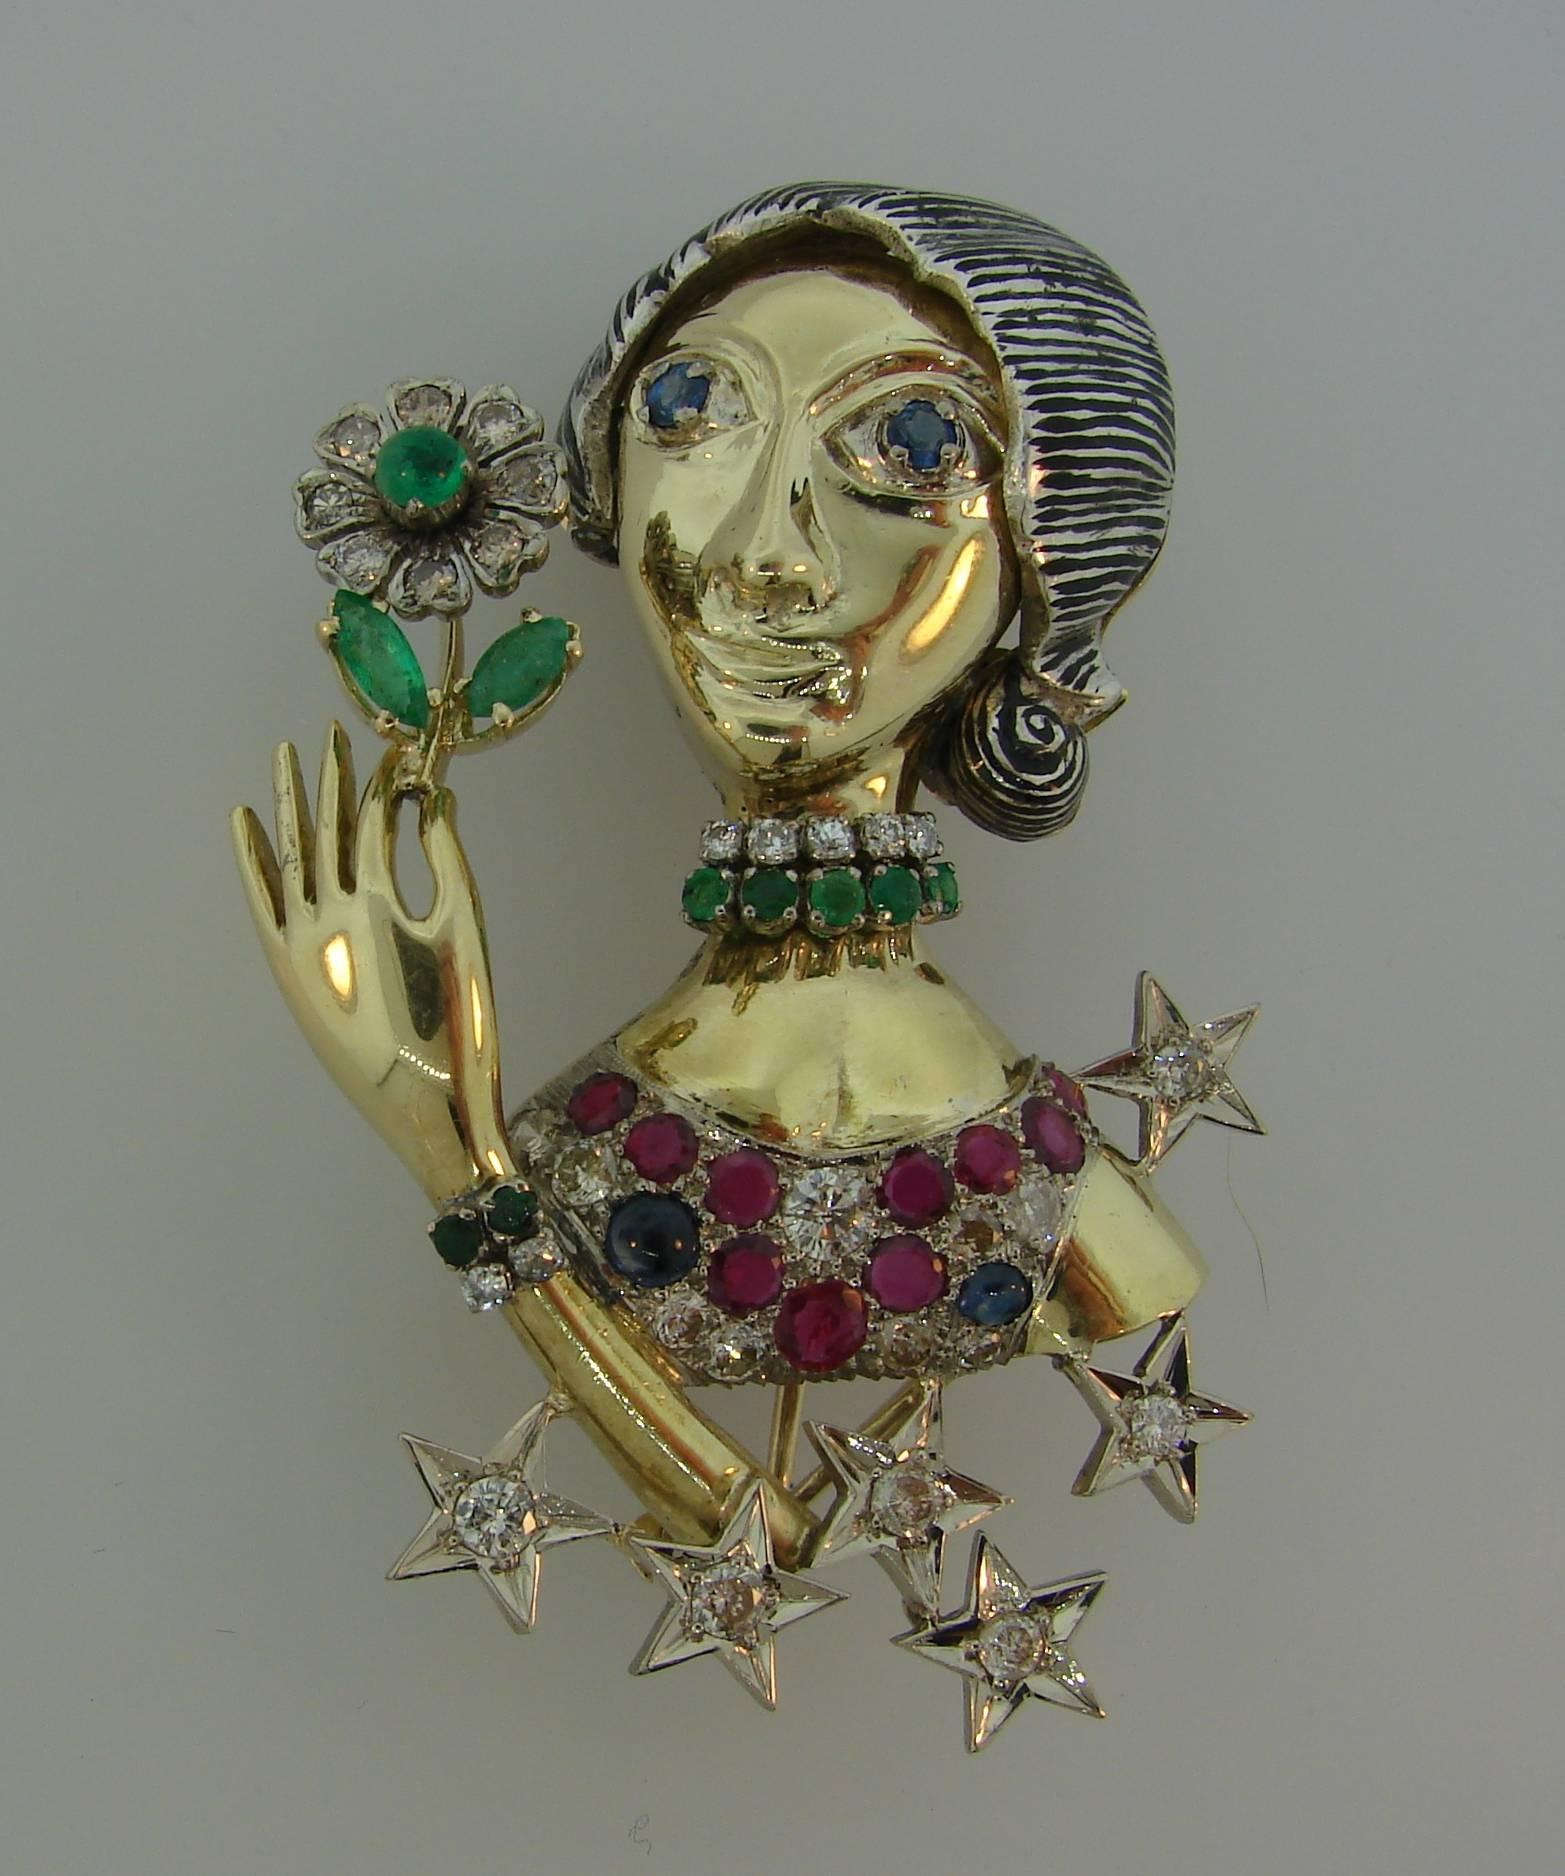 Fun and chic pin depicting a jeweled woman with a flower - definitely a conversational piece! Wearable and cute, the brooch is a great addition to your jewelry collection. 
Made of 14 karat (tested) yellow and white gold and encrusted with diamonds,